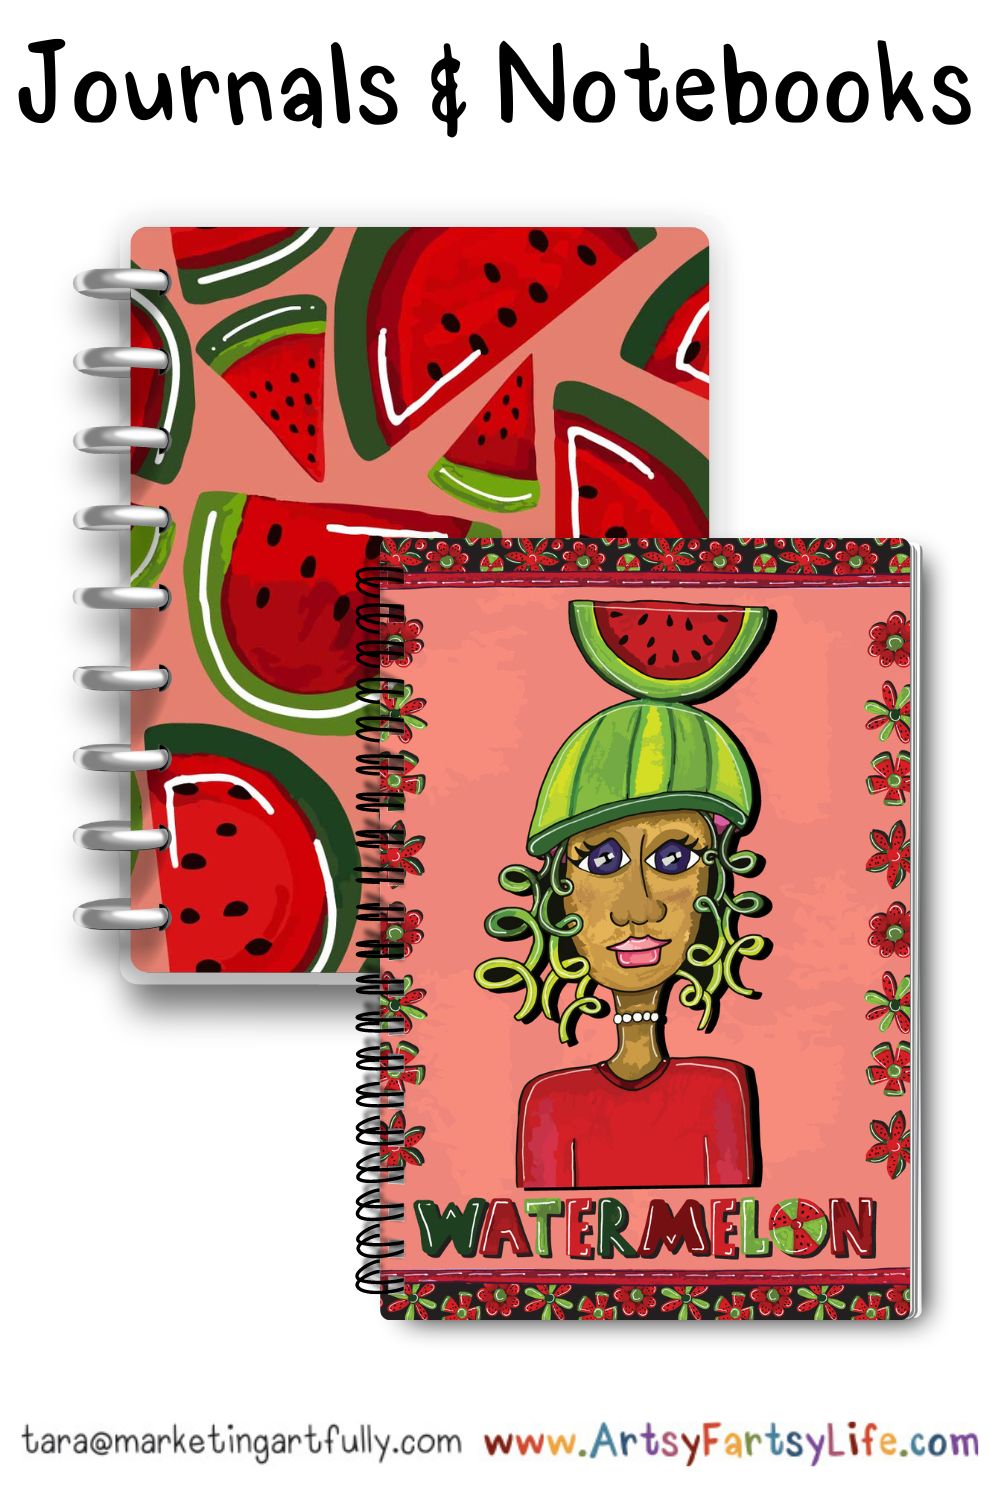 Watermelon Woman Surface Design For Journals and Notebooks